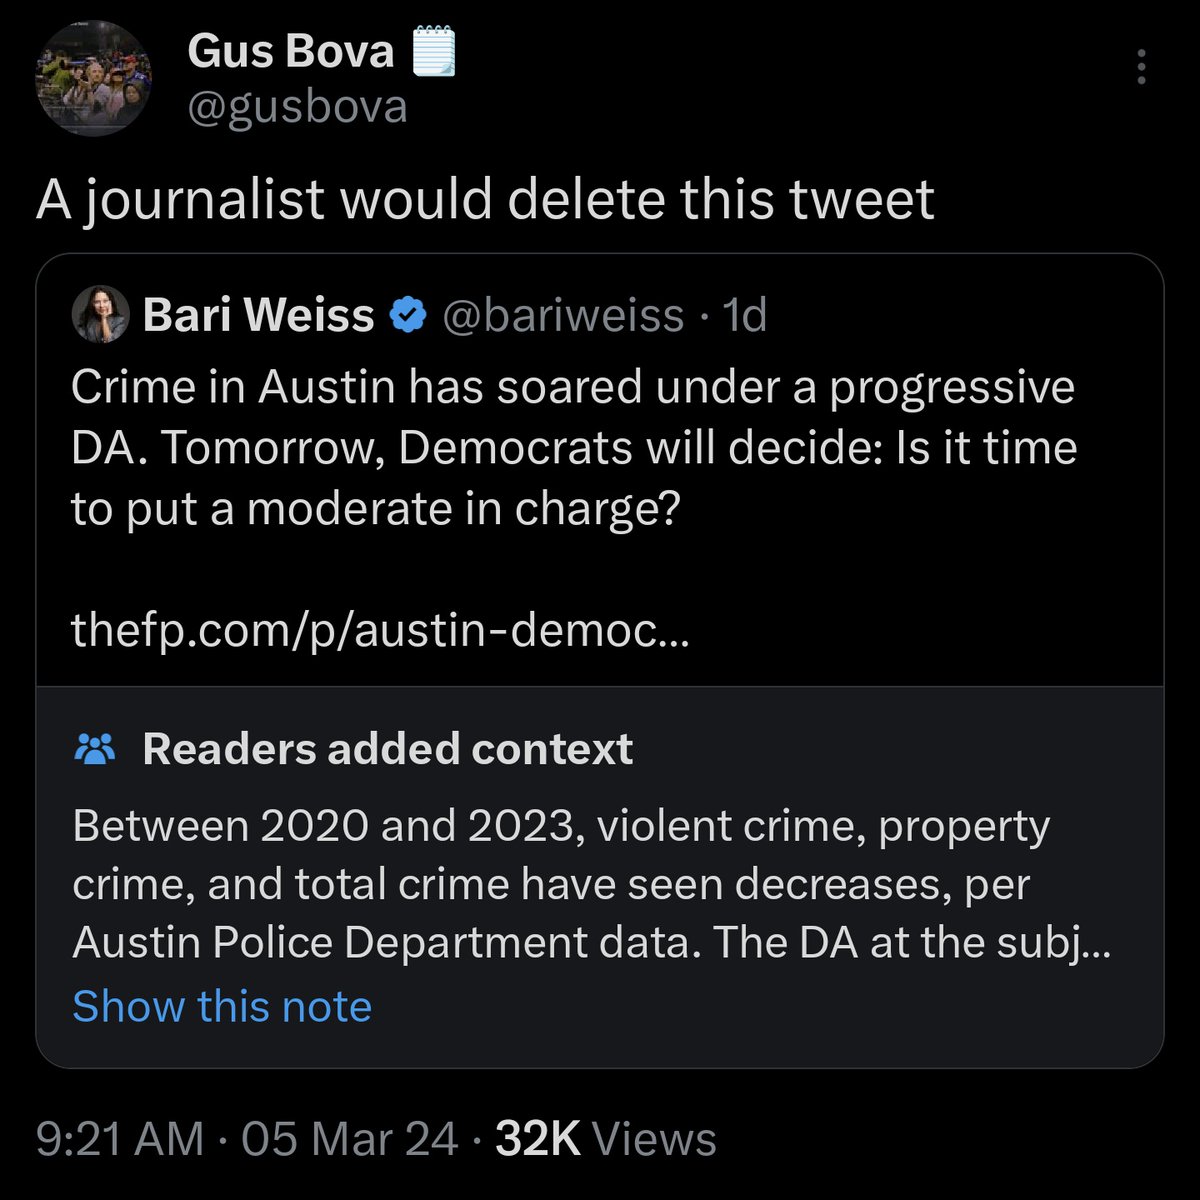 It's incredibly funny that Elon Musk, who pretends not to be a conservative, deleted his post endorsing the challenger to Austin DA Jose Garza after Garza won handily, while Bari Weiss, who pretends to be a journalist, has not deleted her factually incorrect post attacking Garza